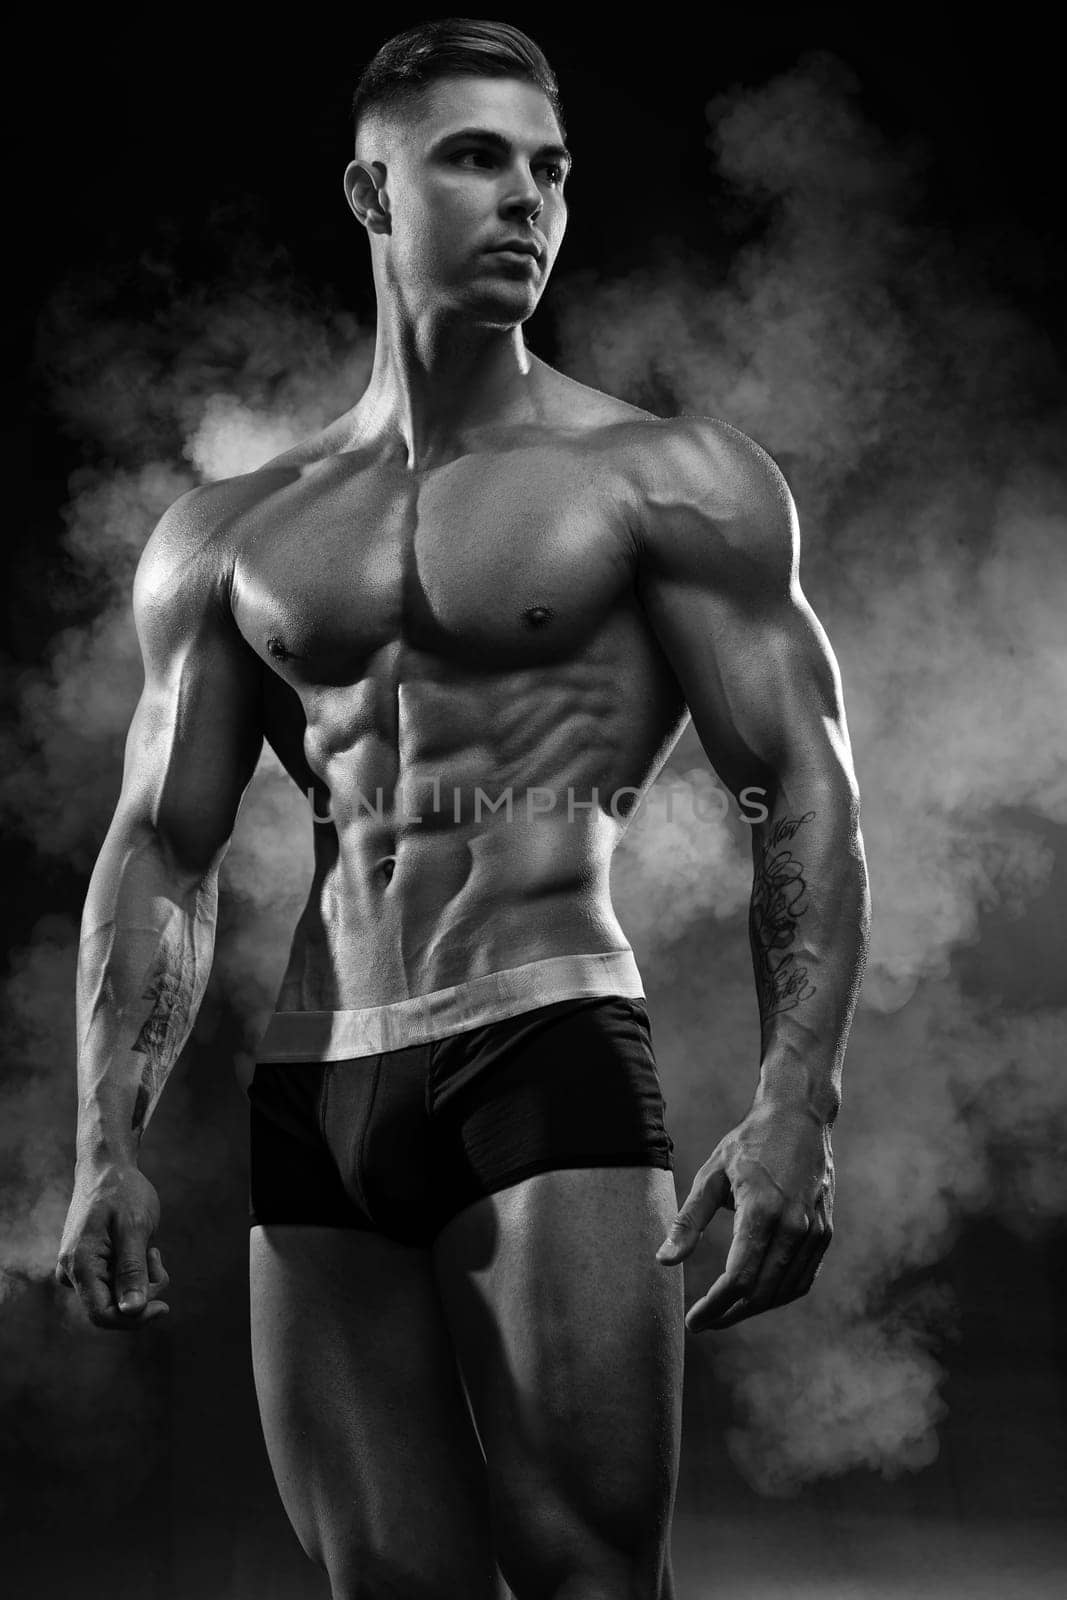 Bodybuilder adult muscular male model posing on black background in shorts demonstrates perfect abs with a low percentage of fat, black and white photo